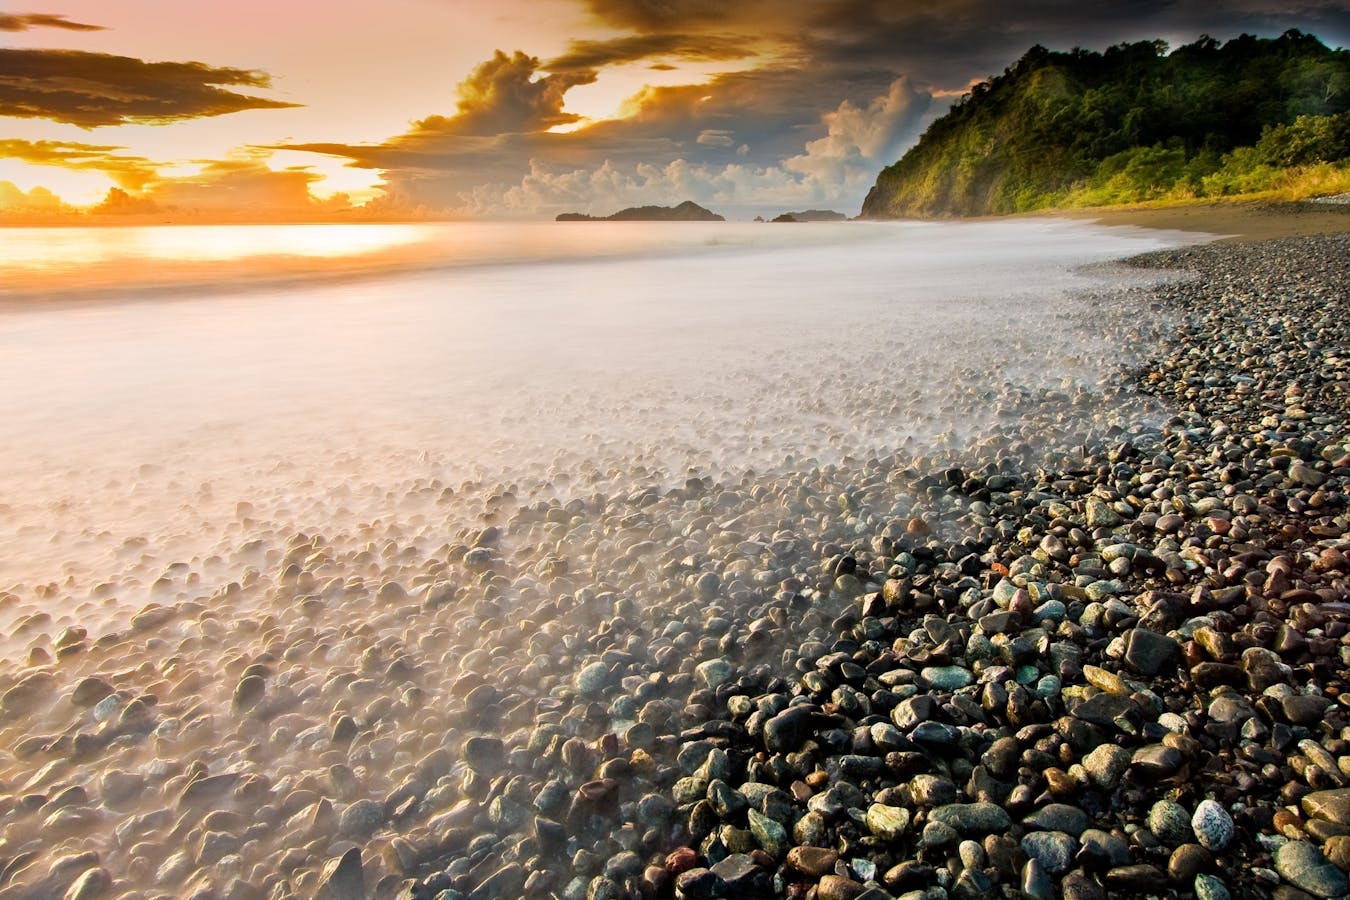 Sunrise on a turtle nesting beach in Central Sulawesi, Indonesia 